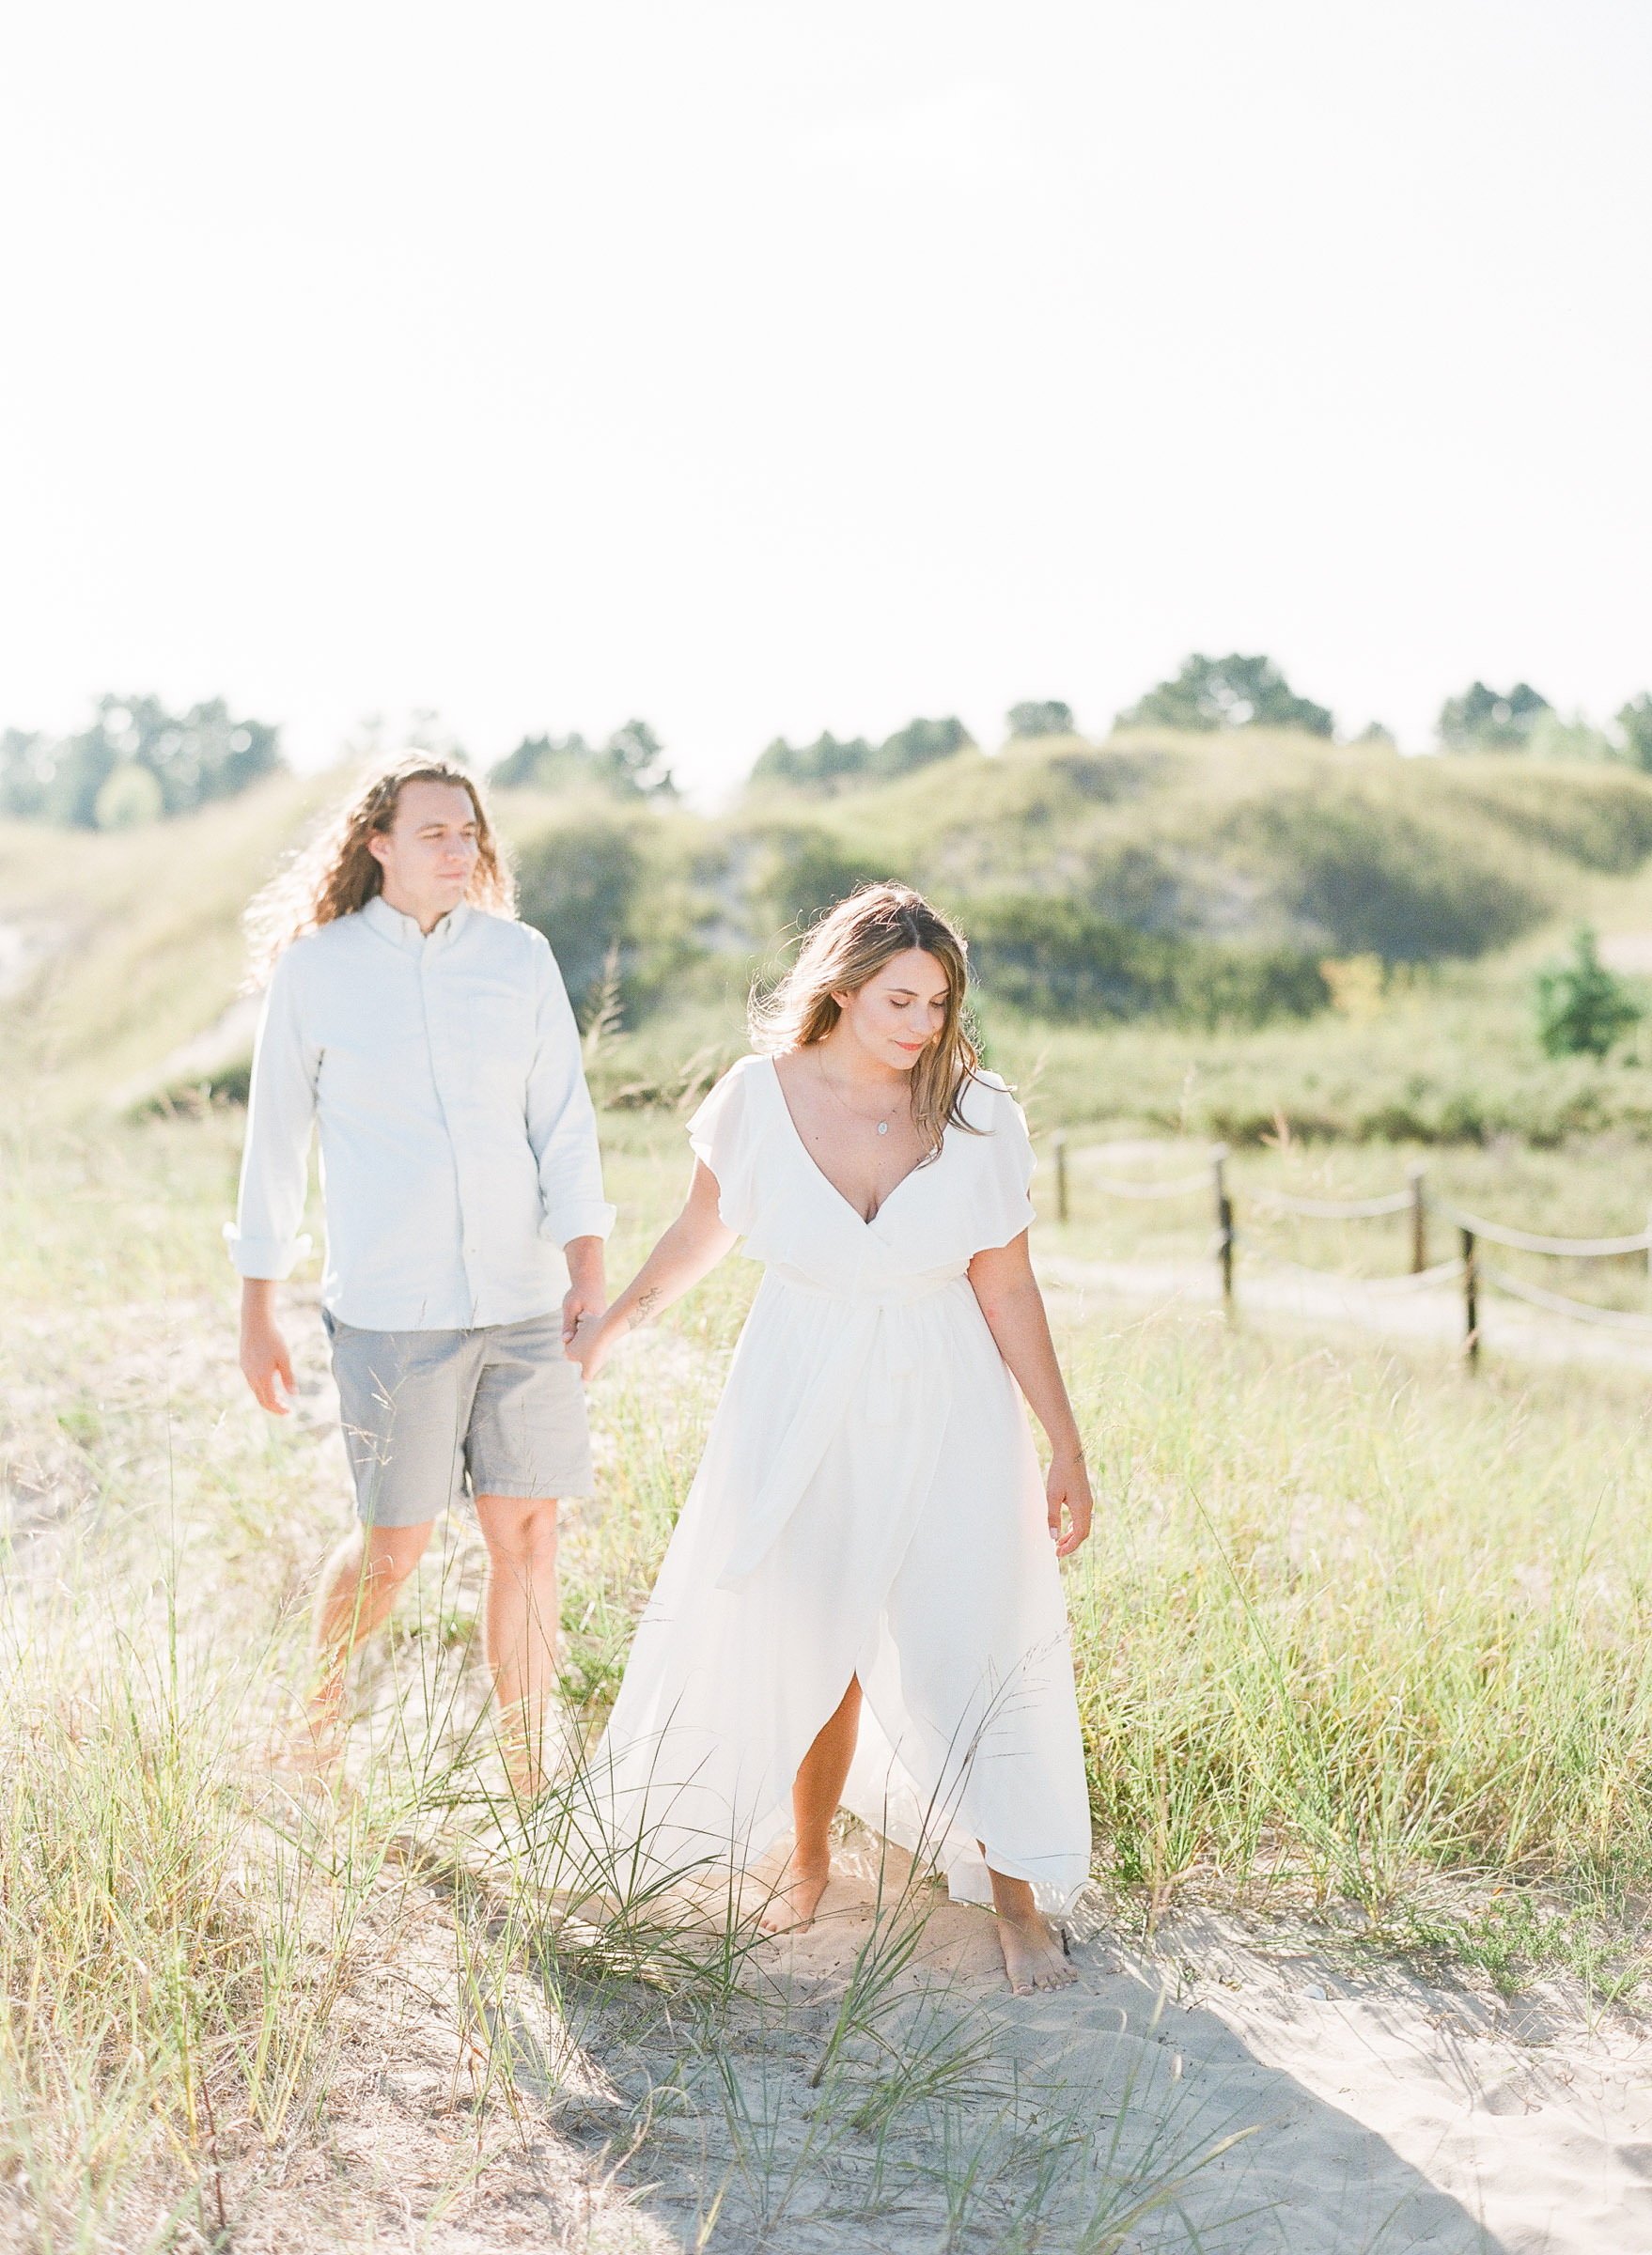 A couple get's their engagement photos done at Kohler Andrae State Park